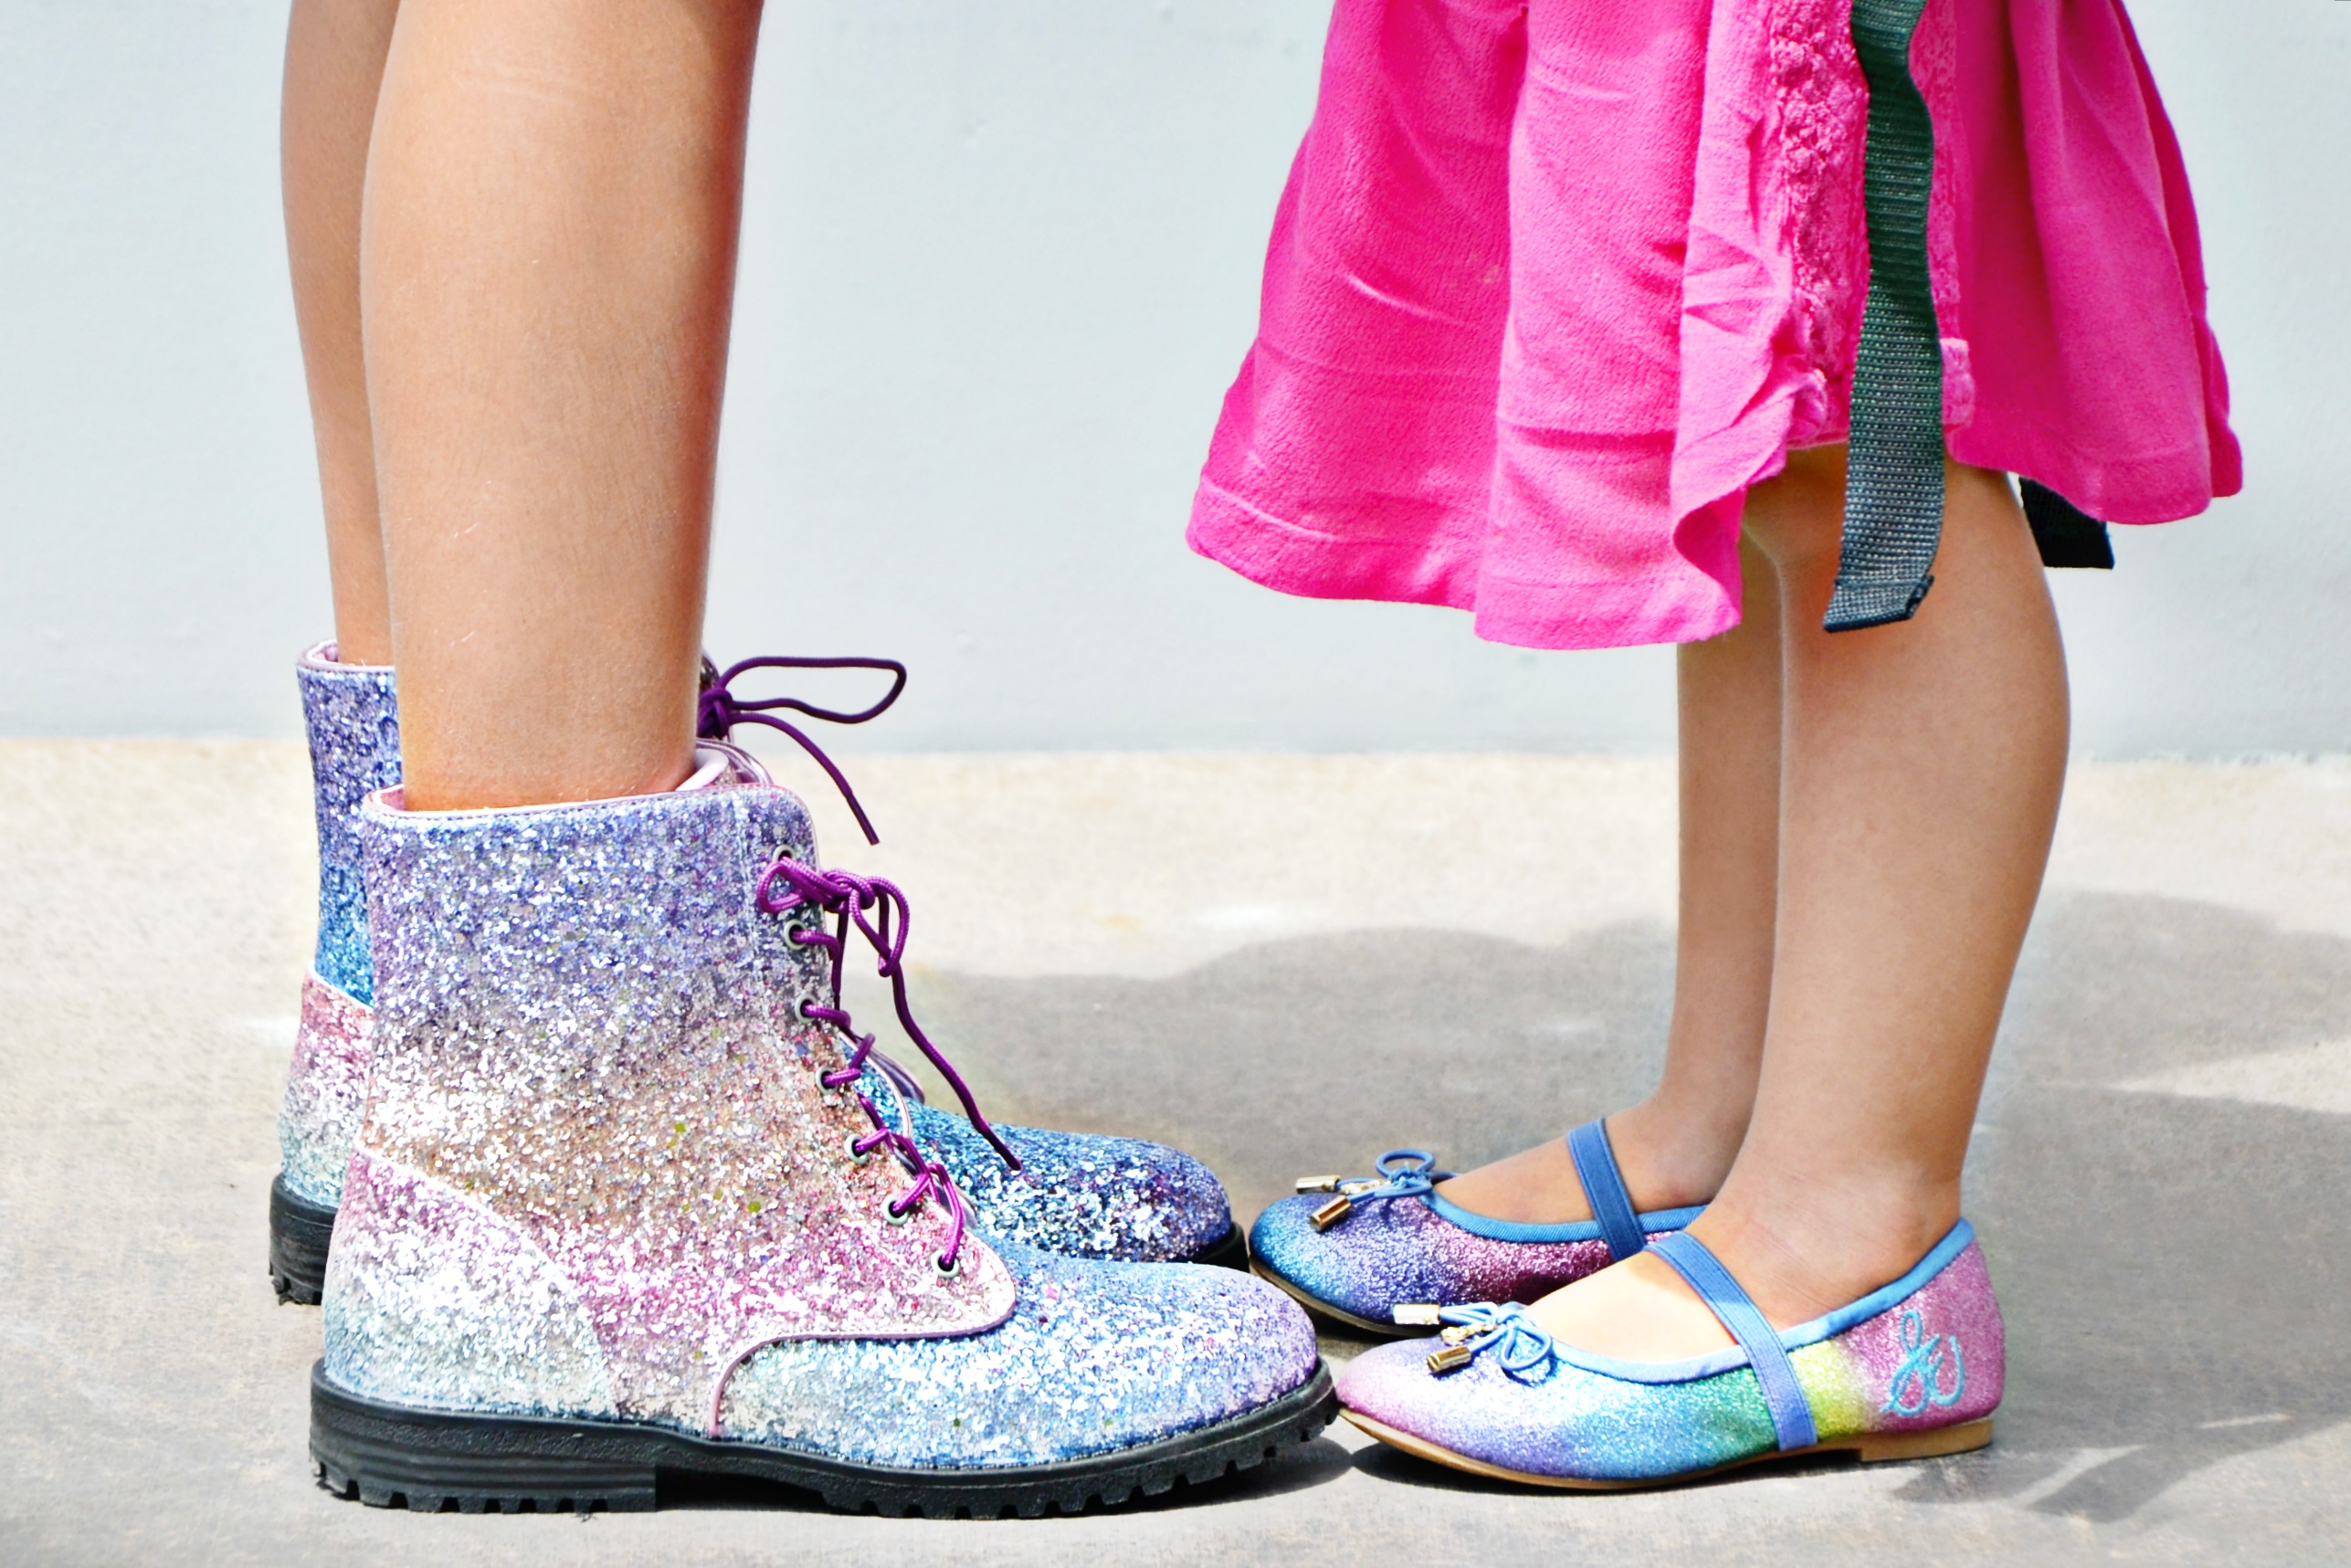 These sisters love their matching rainbow glitter shoes from KidsShoes.